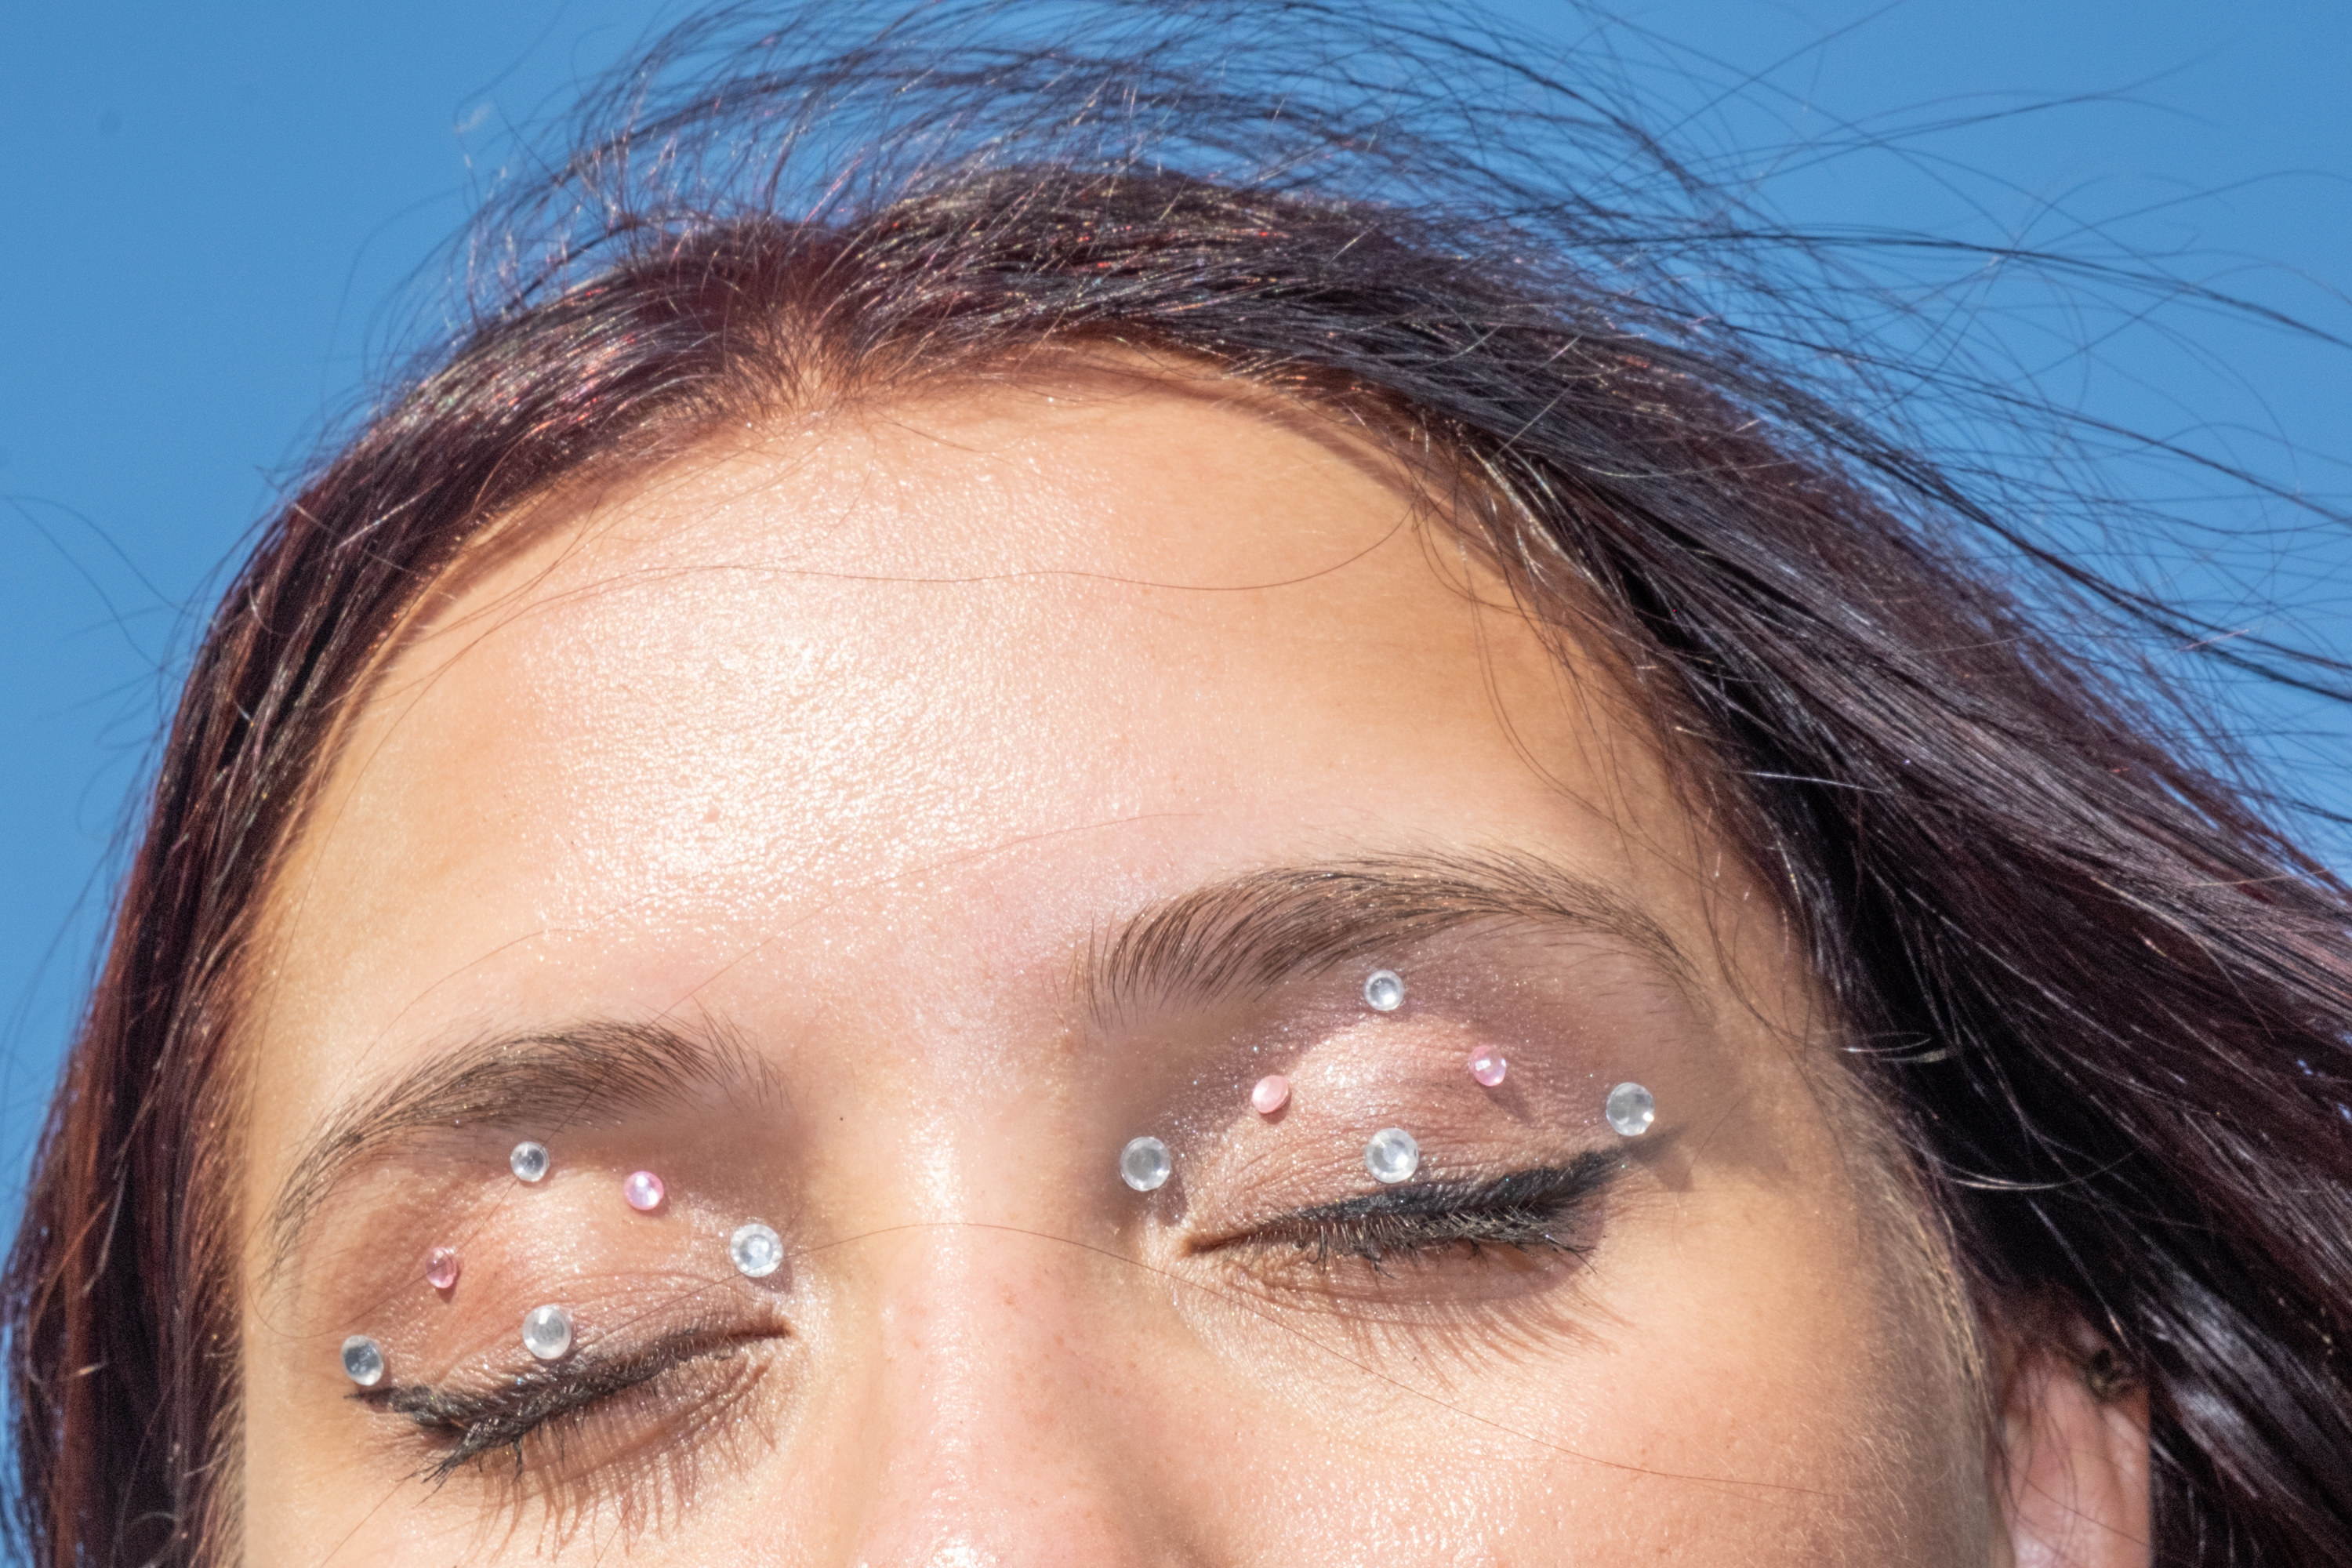 A woman shows her eye lids that are decorated with sequins